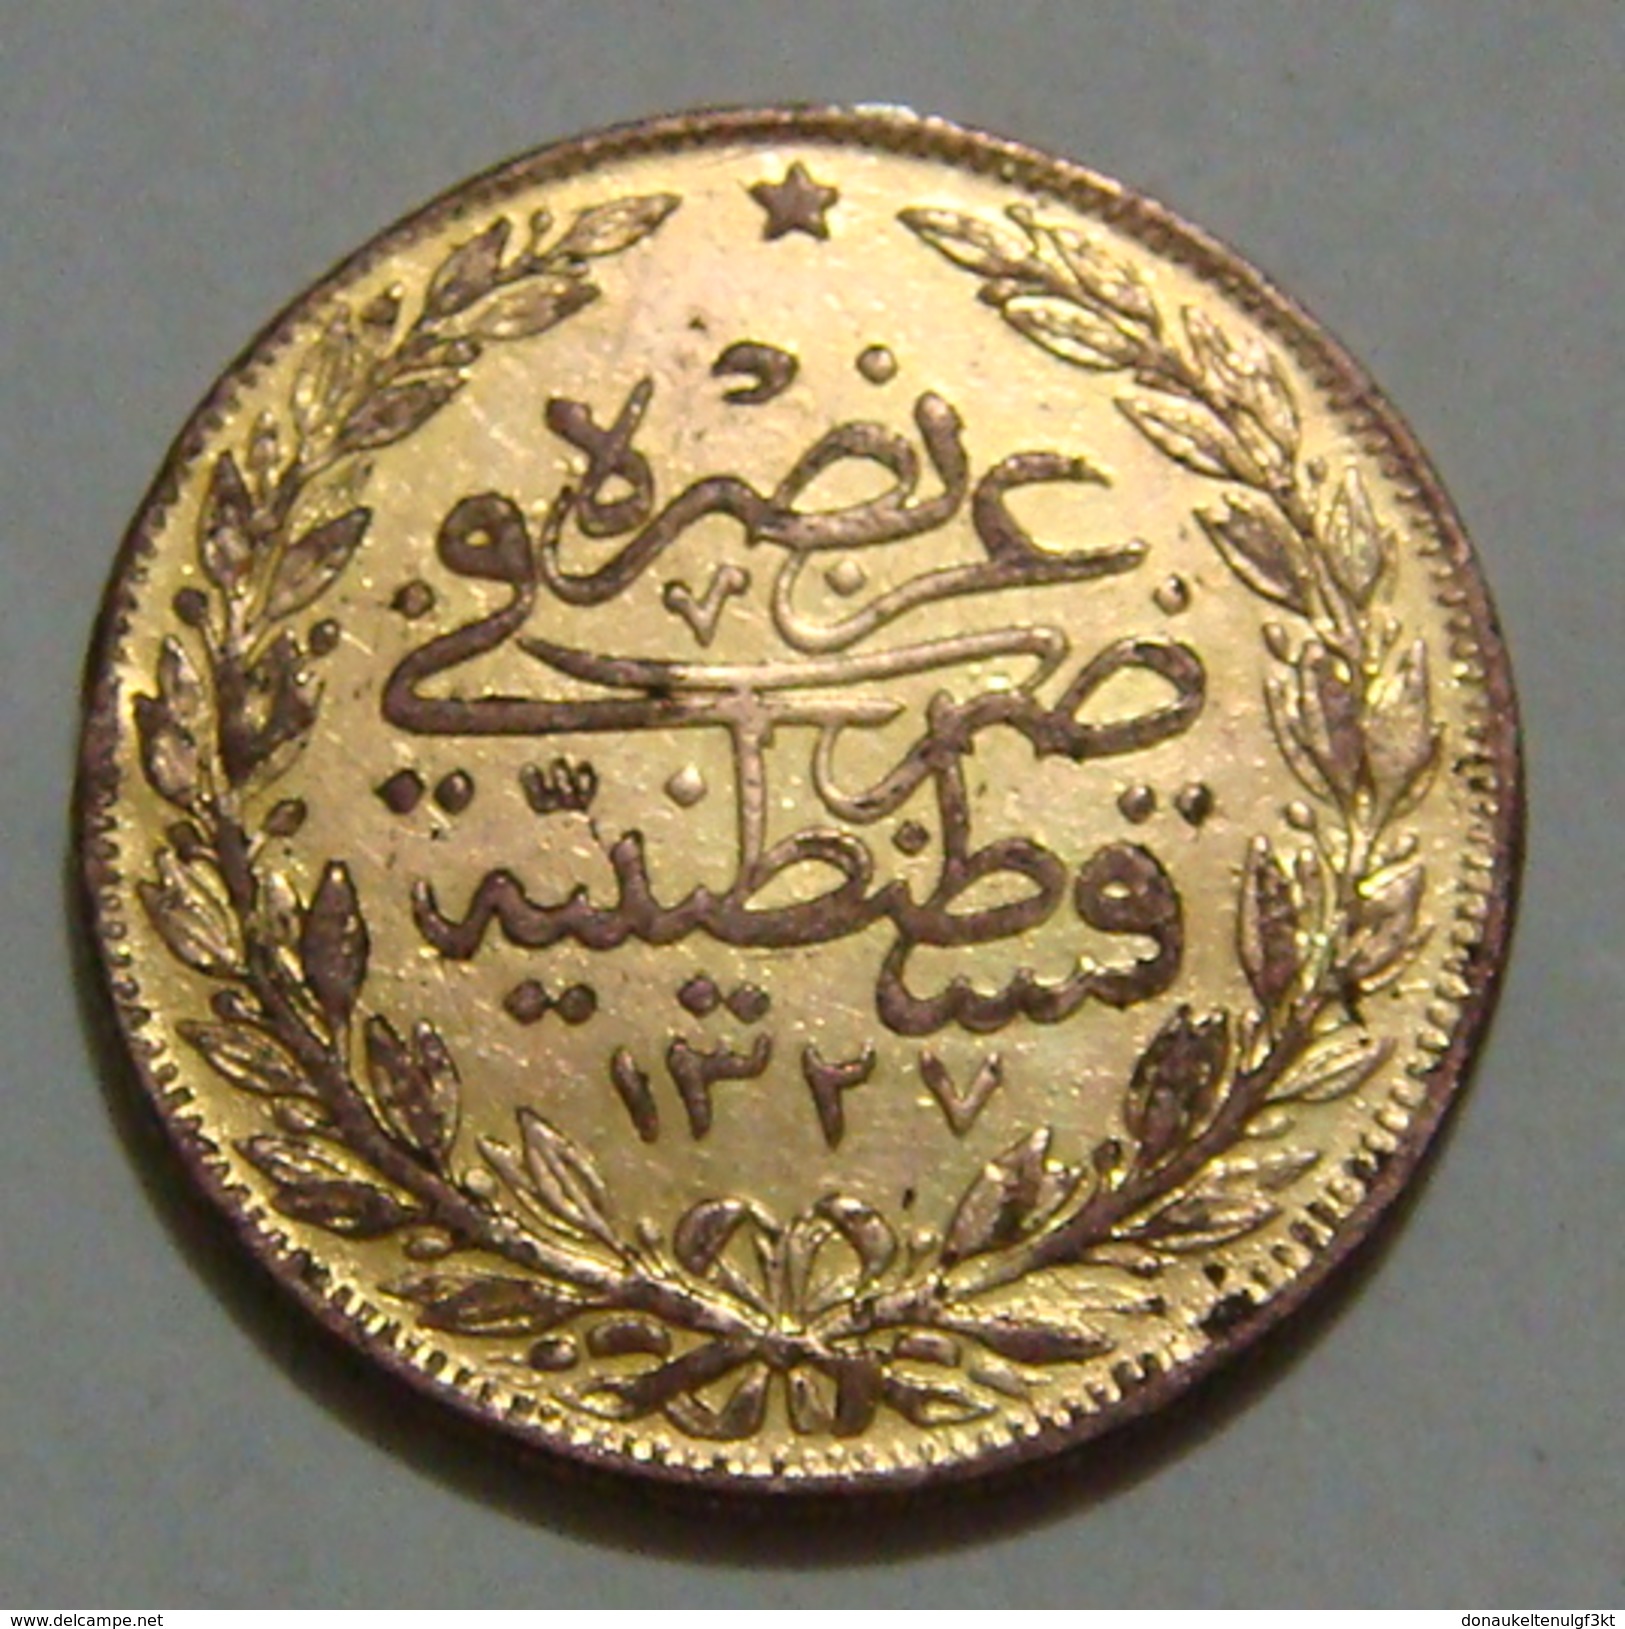 TURKEY OTTOMAN 100 PIASTRES 1327 Year 4, OFFICIAL RESTRIKE OR PROBE, VERY RARE OR UNIQUE, 5.59 Gr. - Turquia